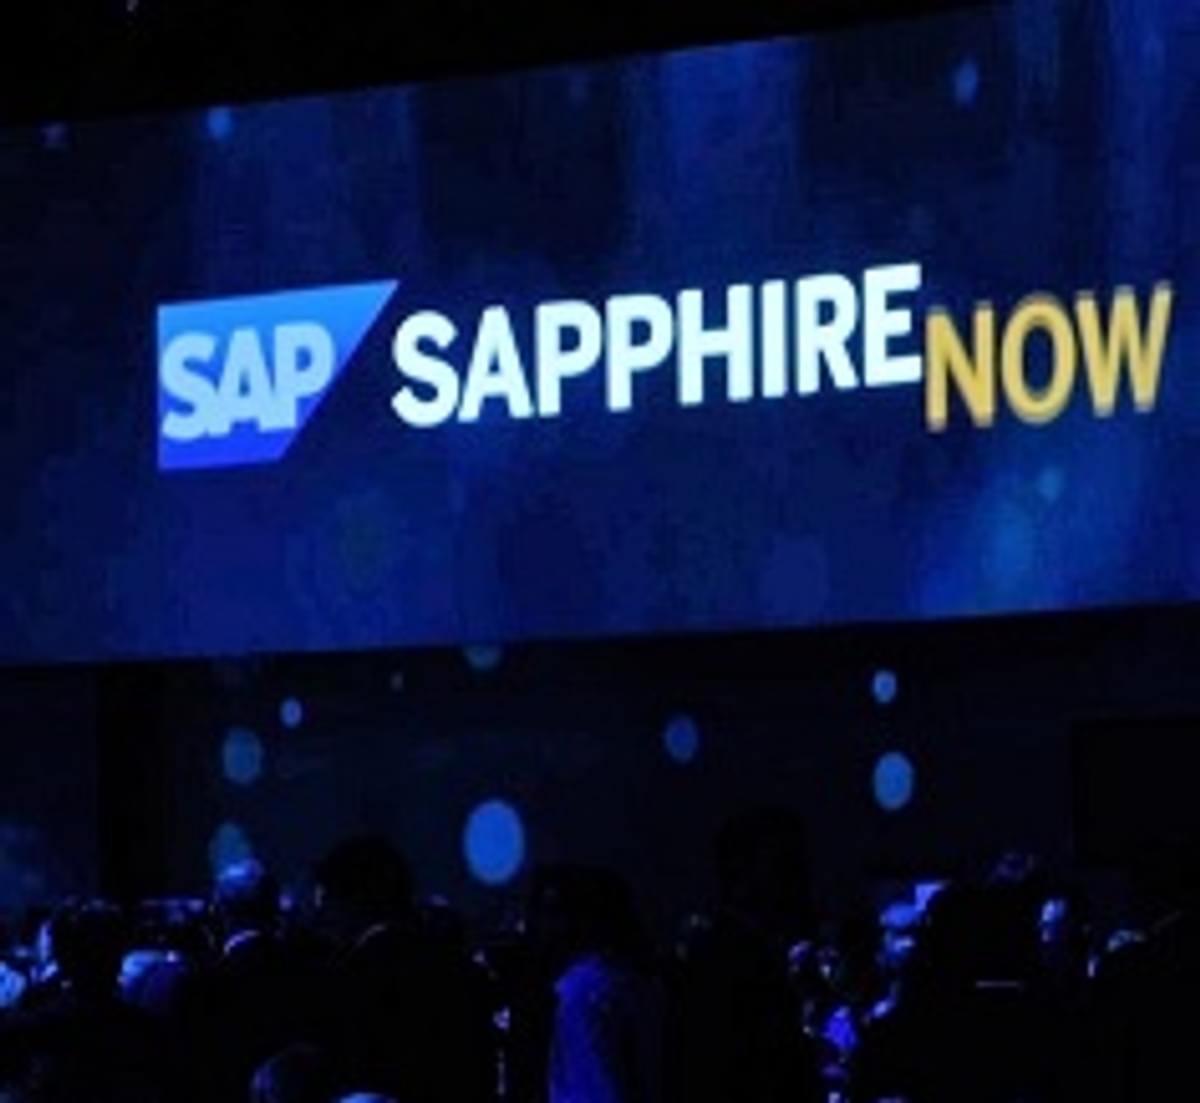 SAPPHIRE NOW + ASUG Annual Conference image